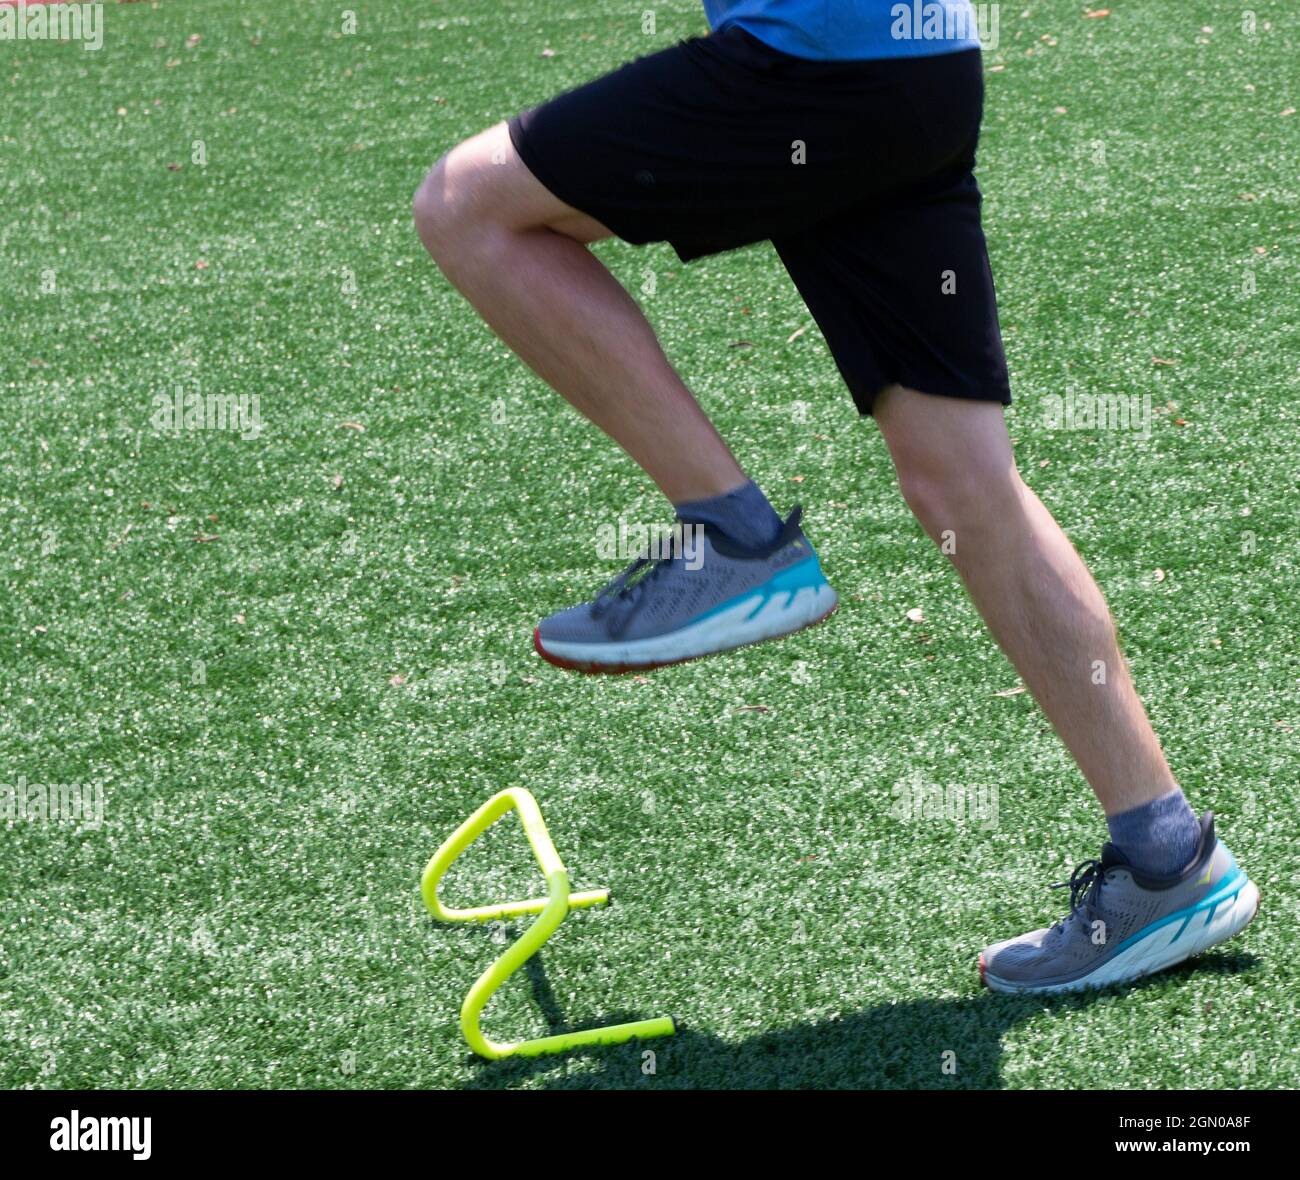 A high school track runner is stepping over yellow mini hurdles on a turf field practicing running form drills. Stock Photo